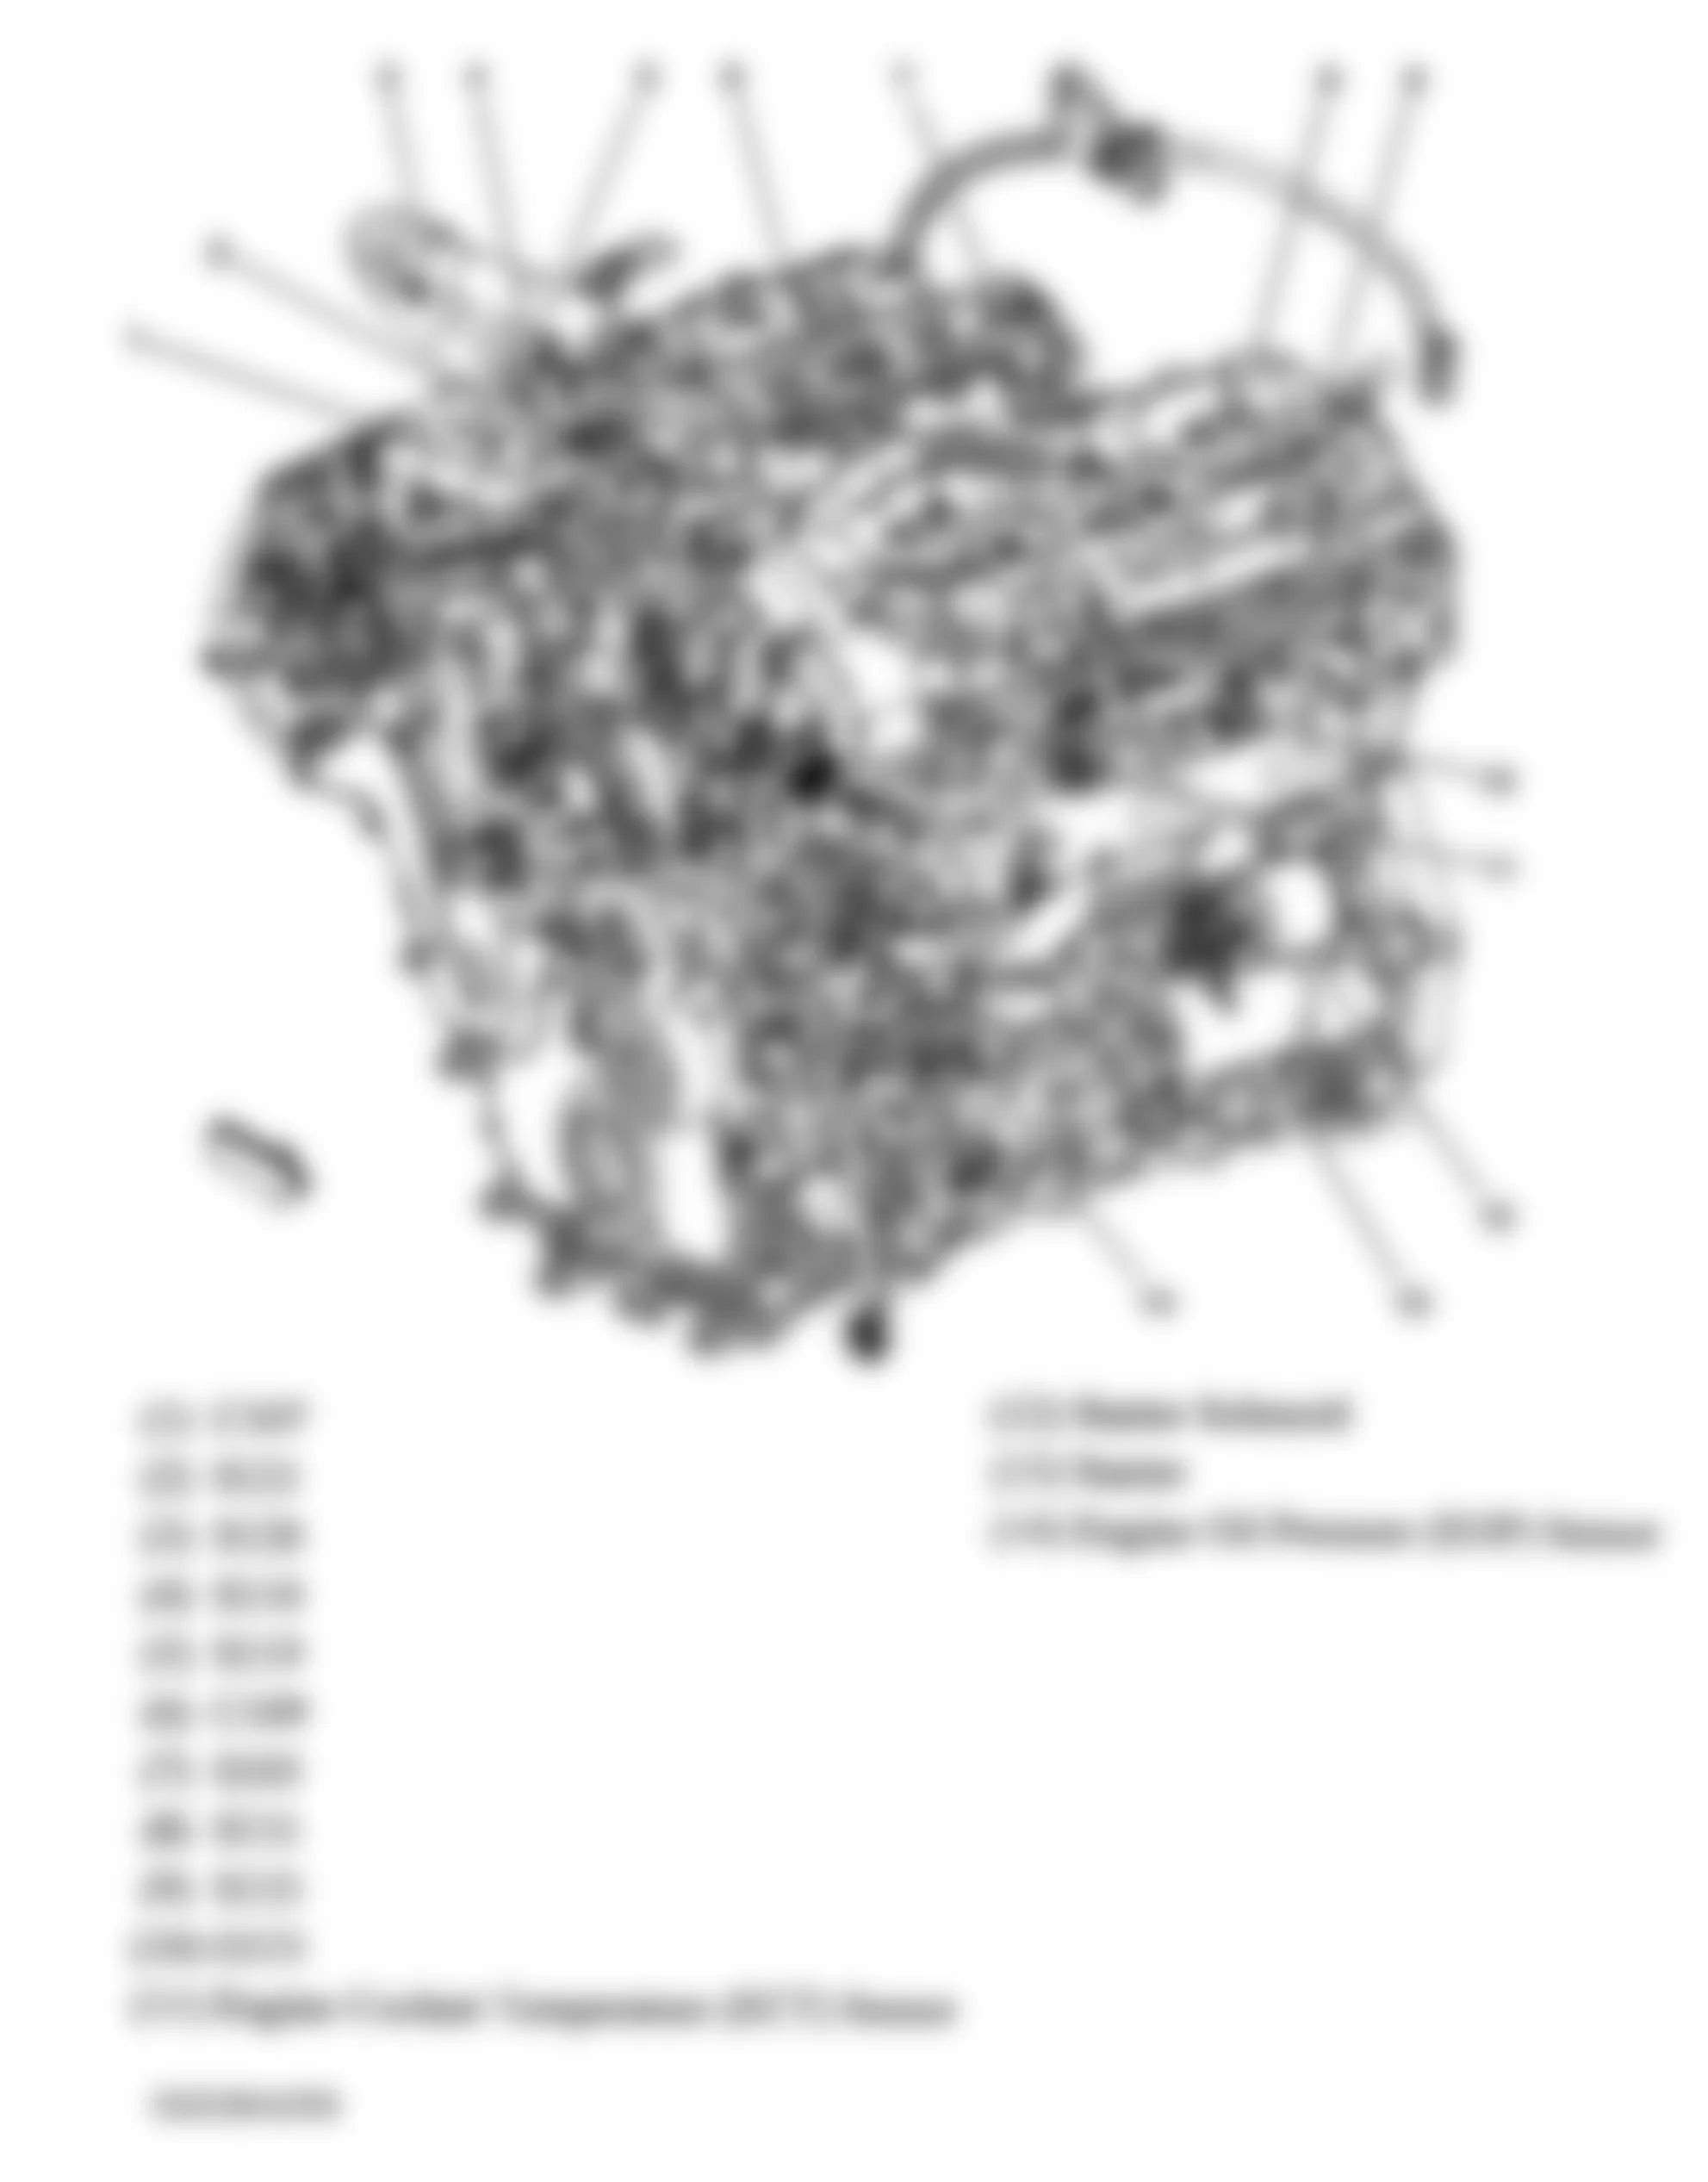 Buick Allure CX 2006 - Component Locations -  Front Of Engine (3.6L)